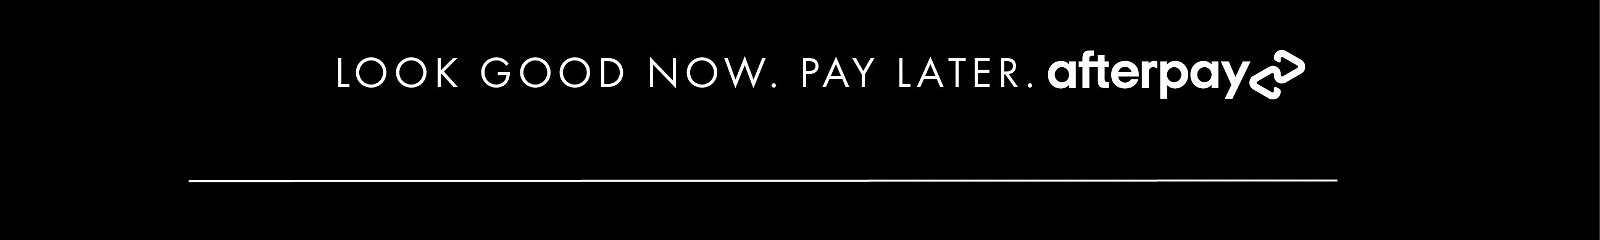 Look Good Now. Pay Later with Afterpay >> Shop Generation Love Clothing